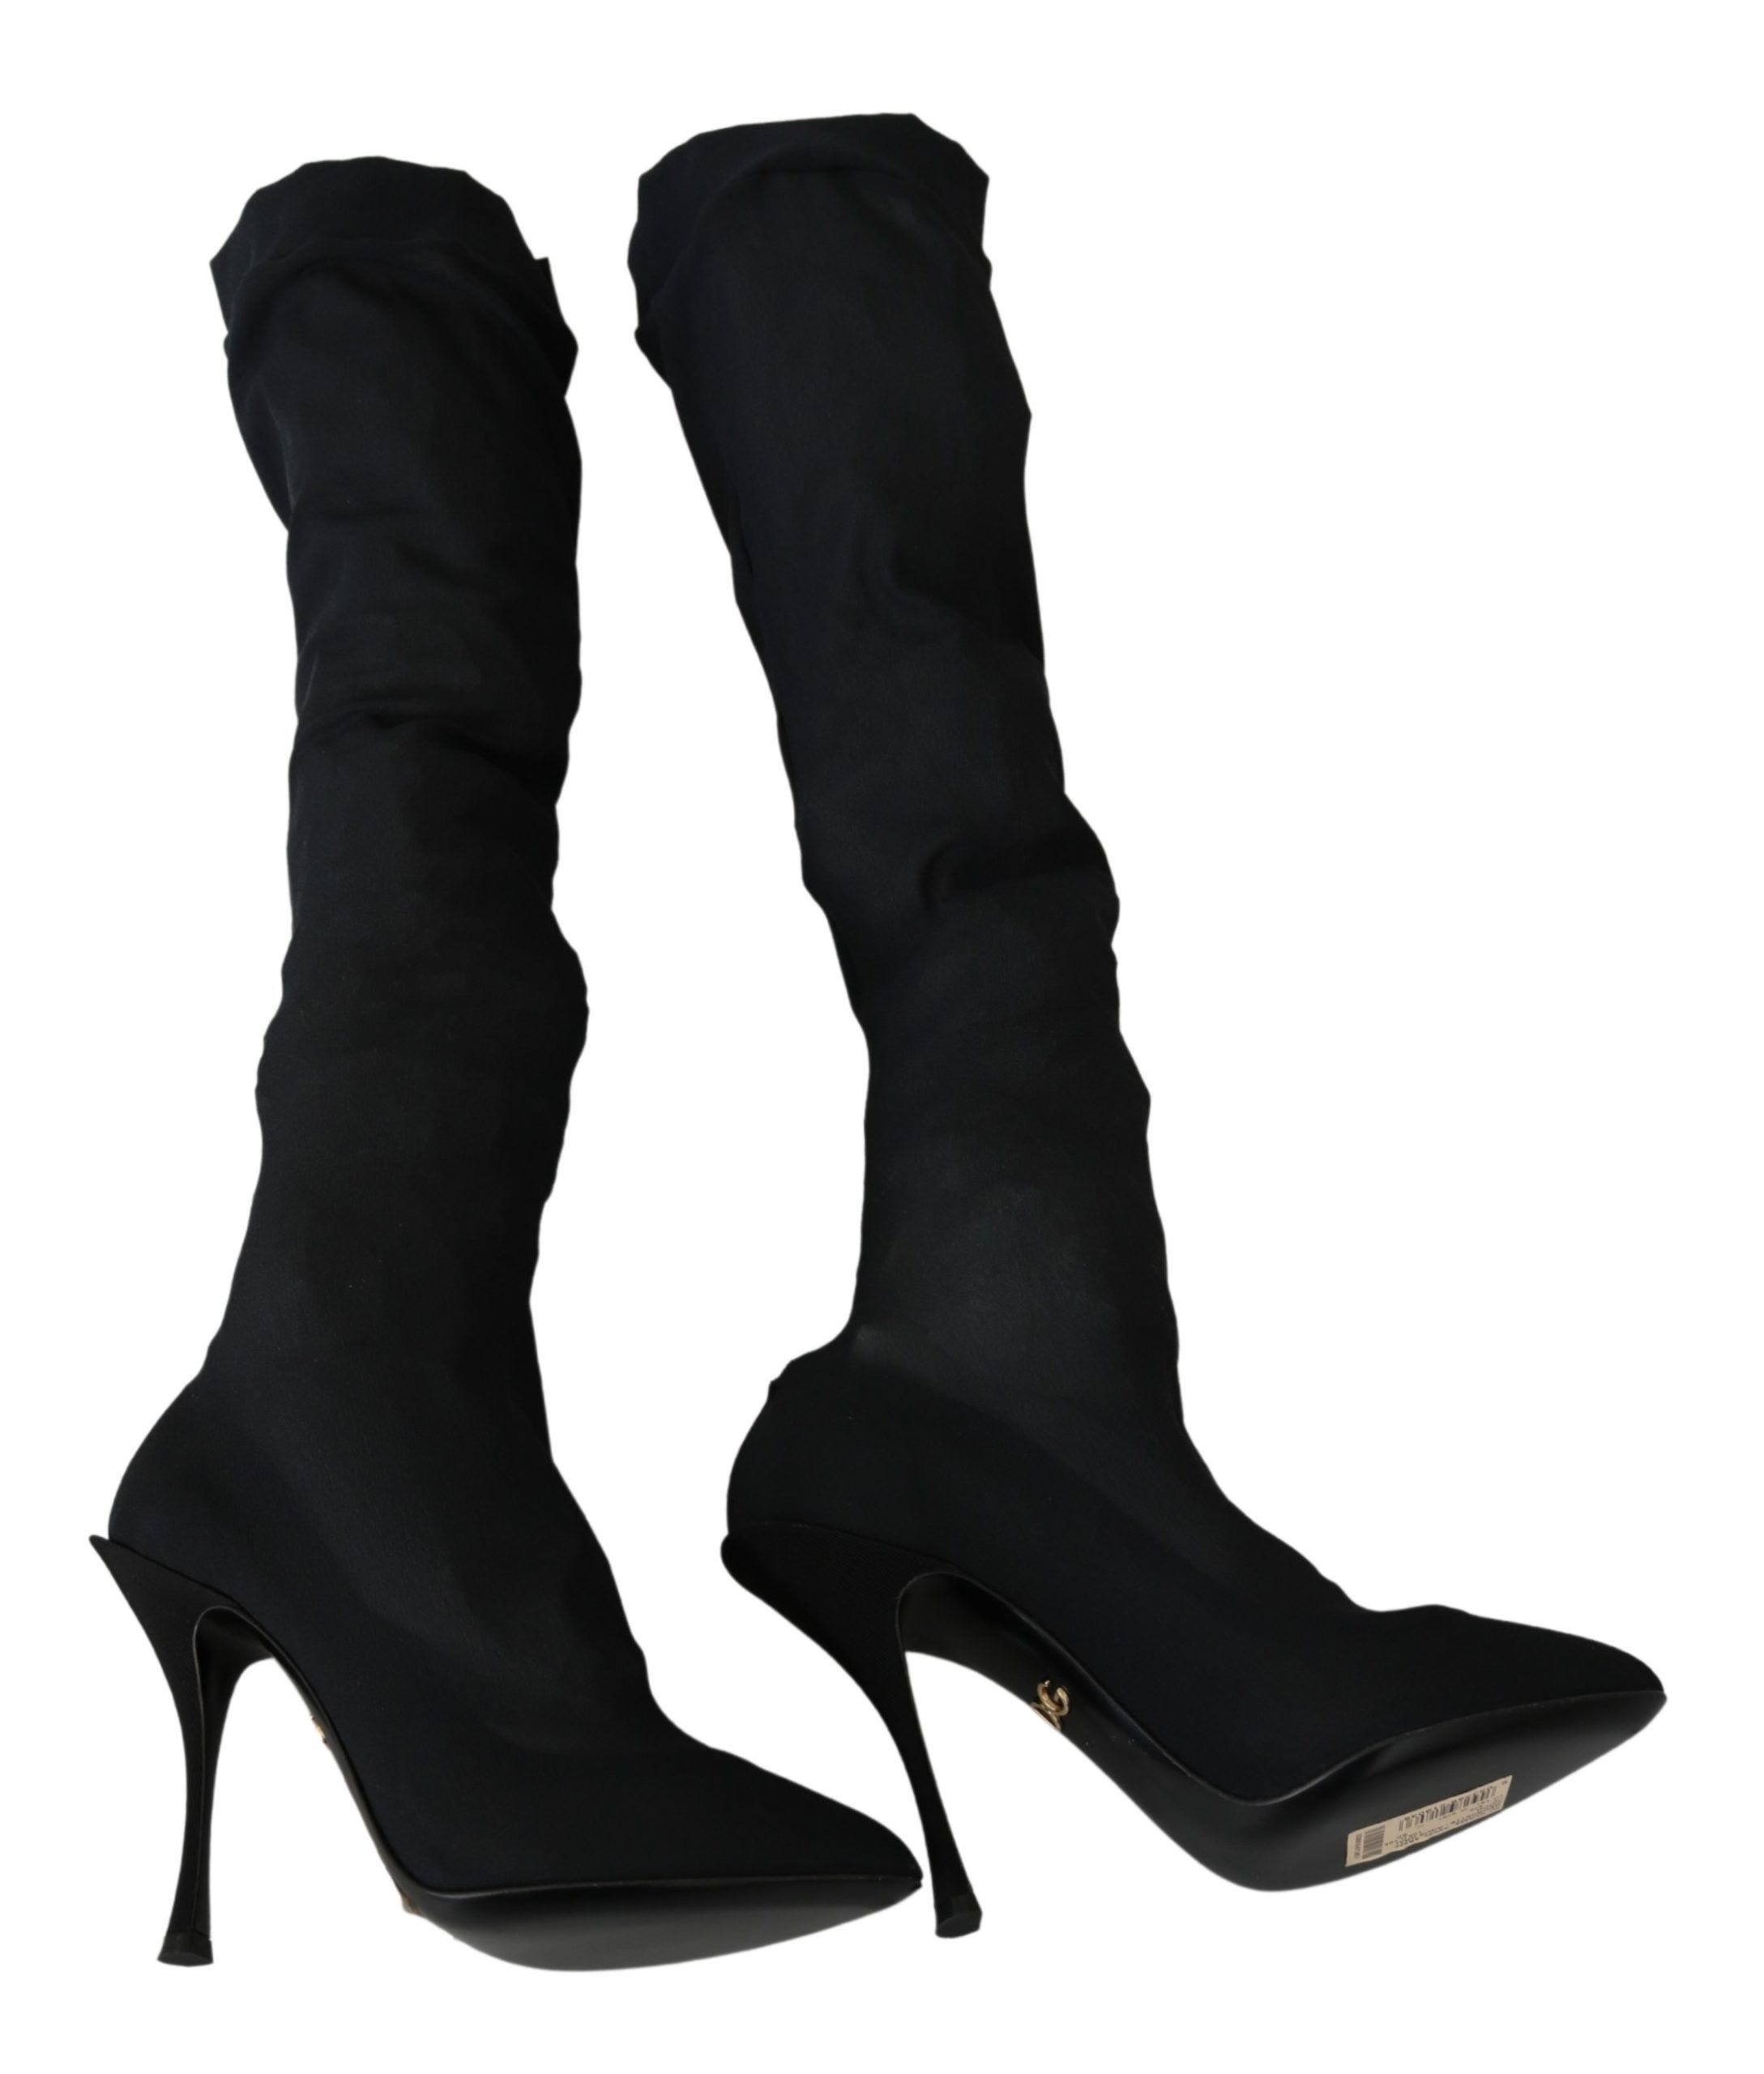 Dolce & Gabbana Black Tulle Stretch Knee Socks Boots Shoes